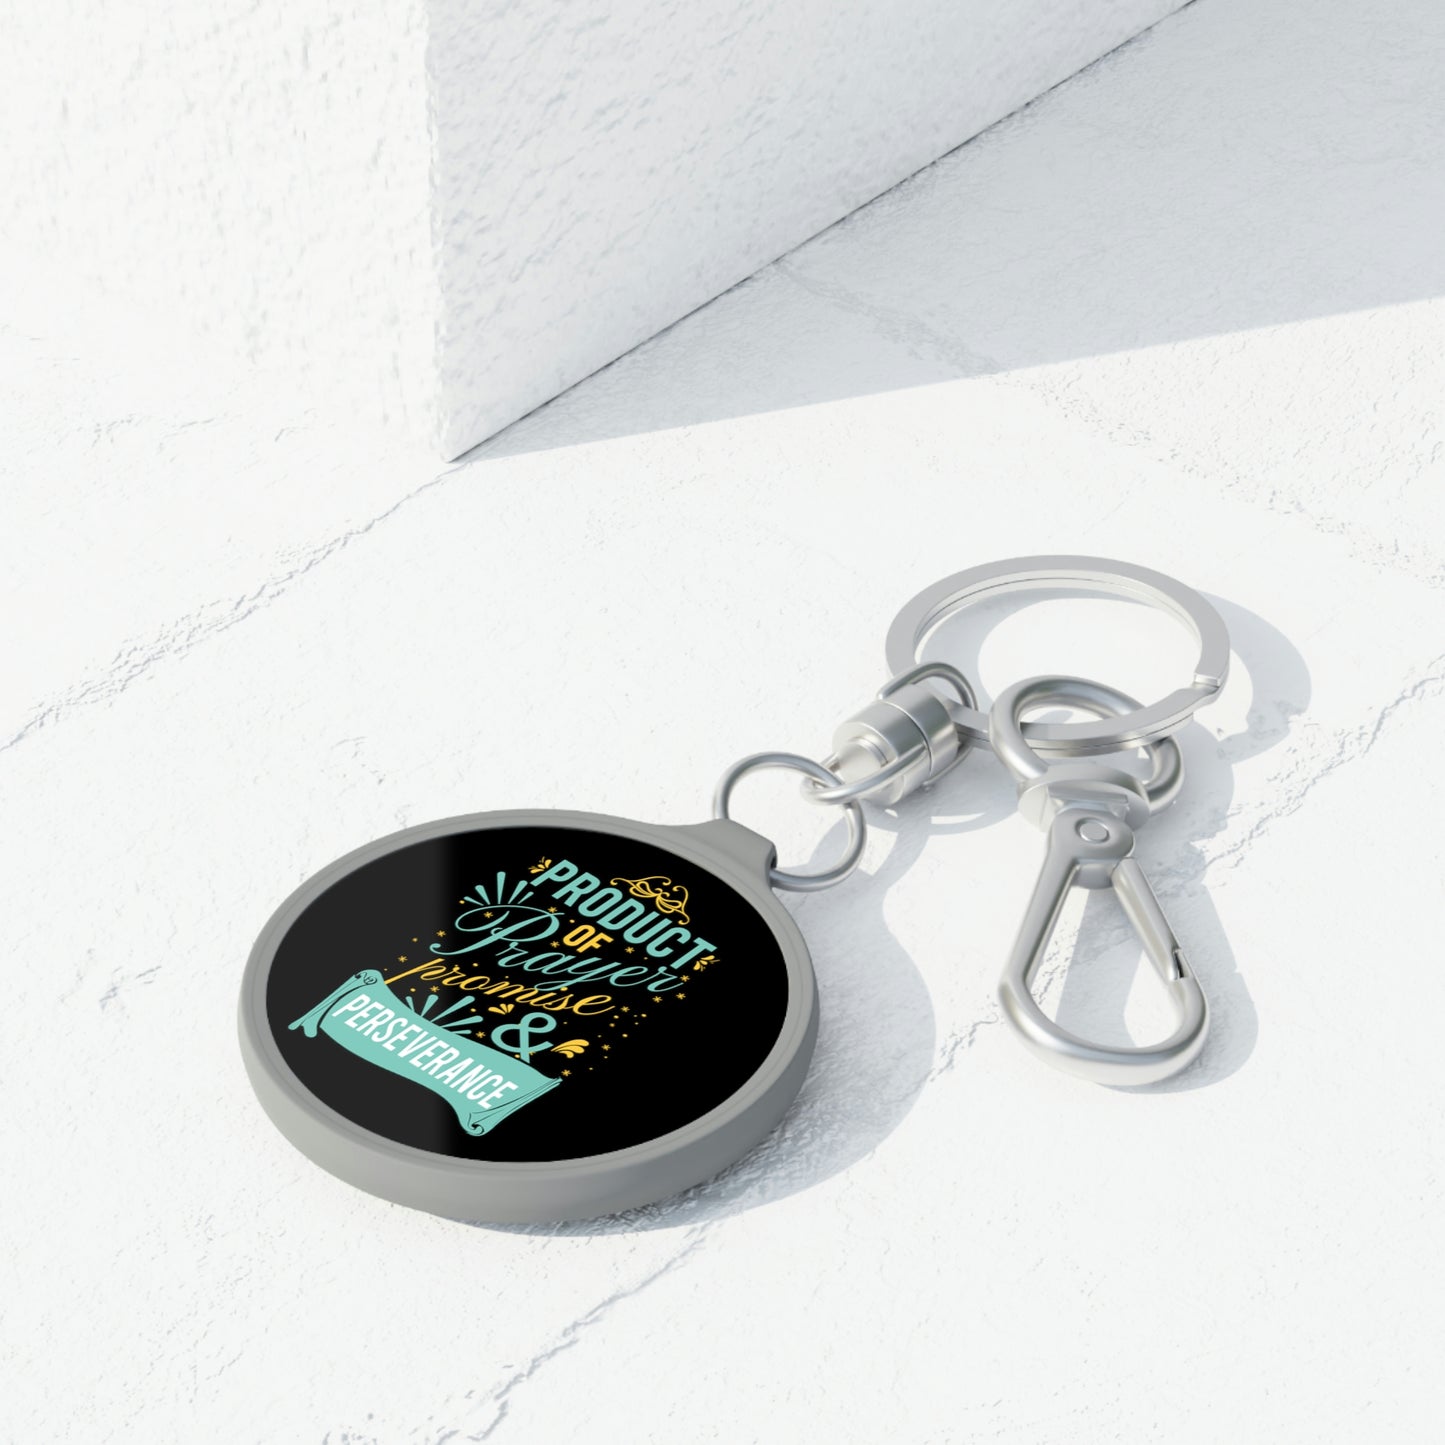 Product Of Prayer, Promise, and Perseverance Key Fob